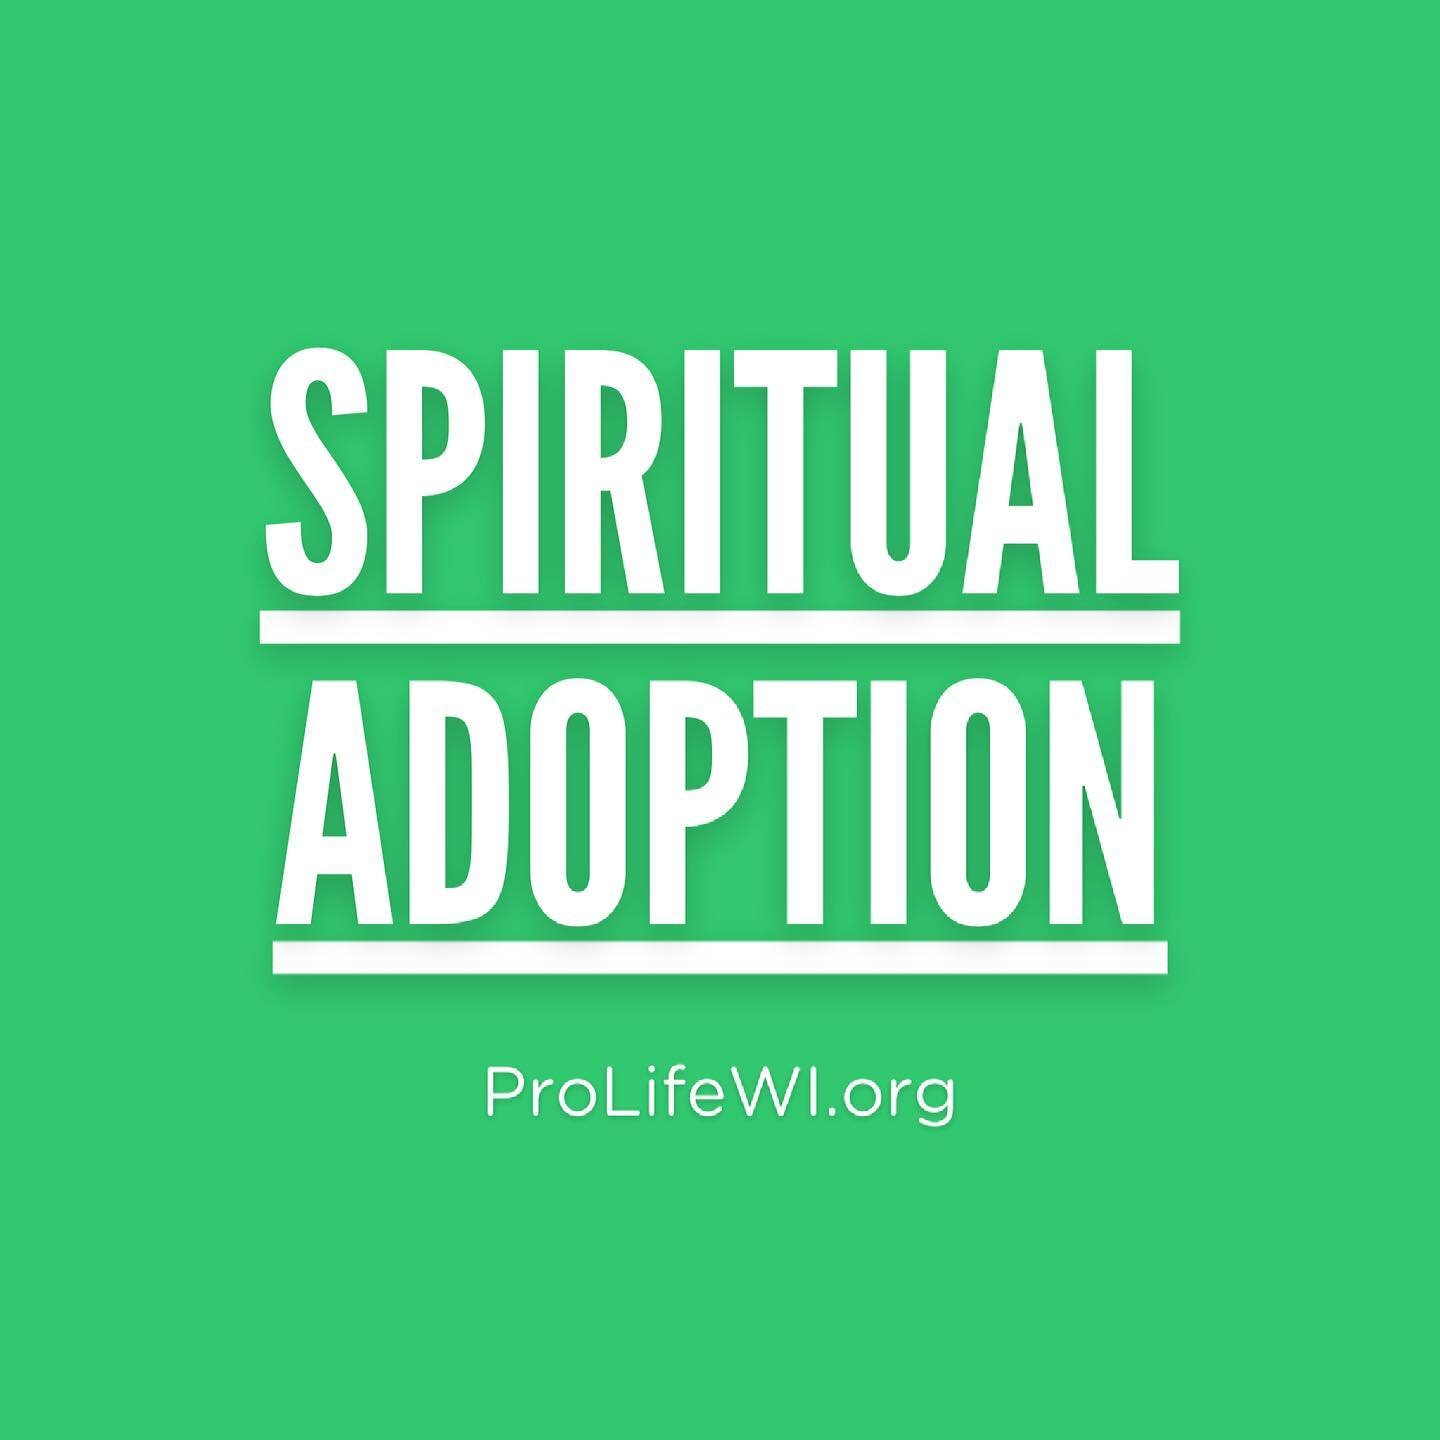 You can save lives through your prayer! Spiritual adoption is a powerful way to intercede on behalf of the preborn and save lives. 

Will you commit to praying for our preborn brothers and sisters each day?